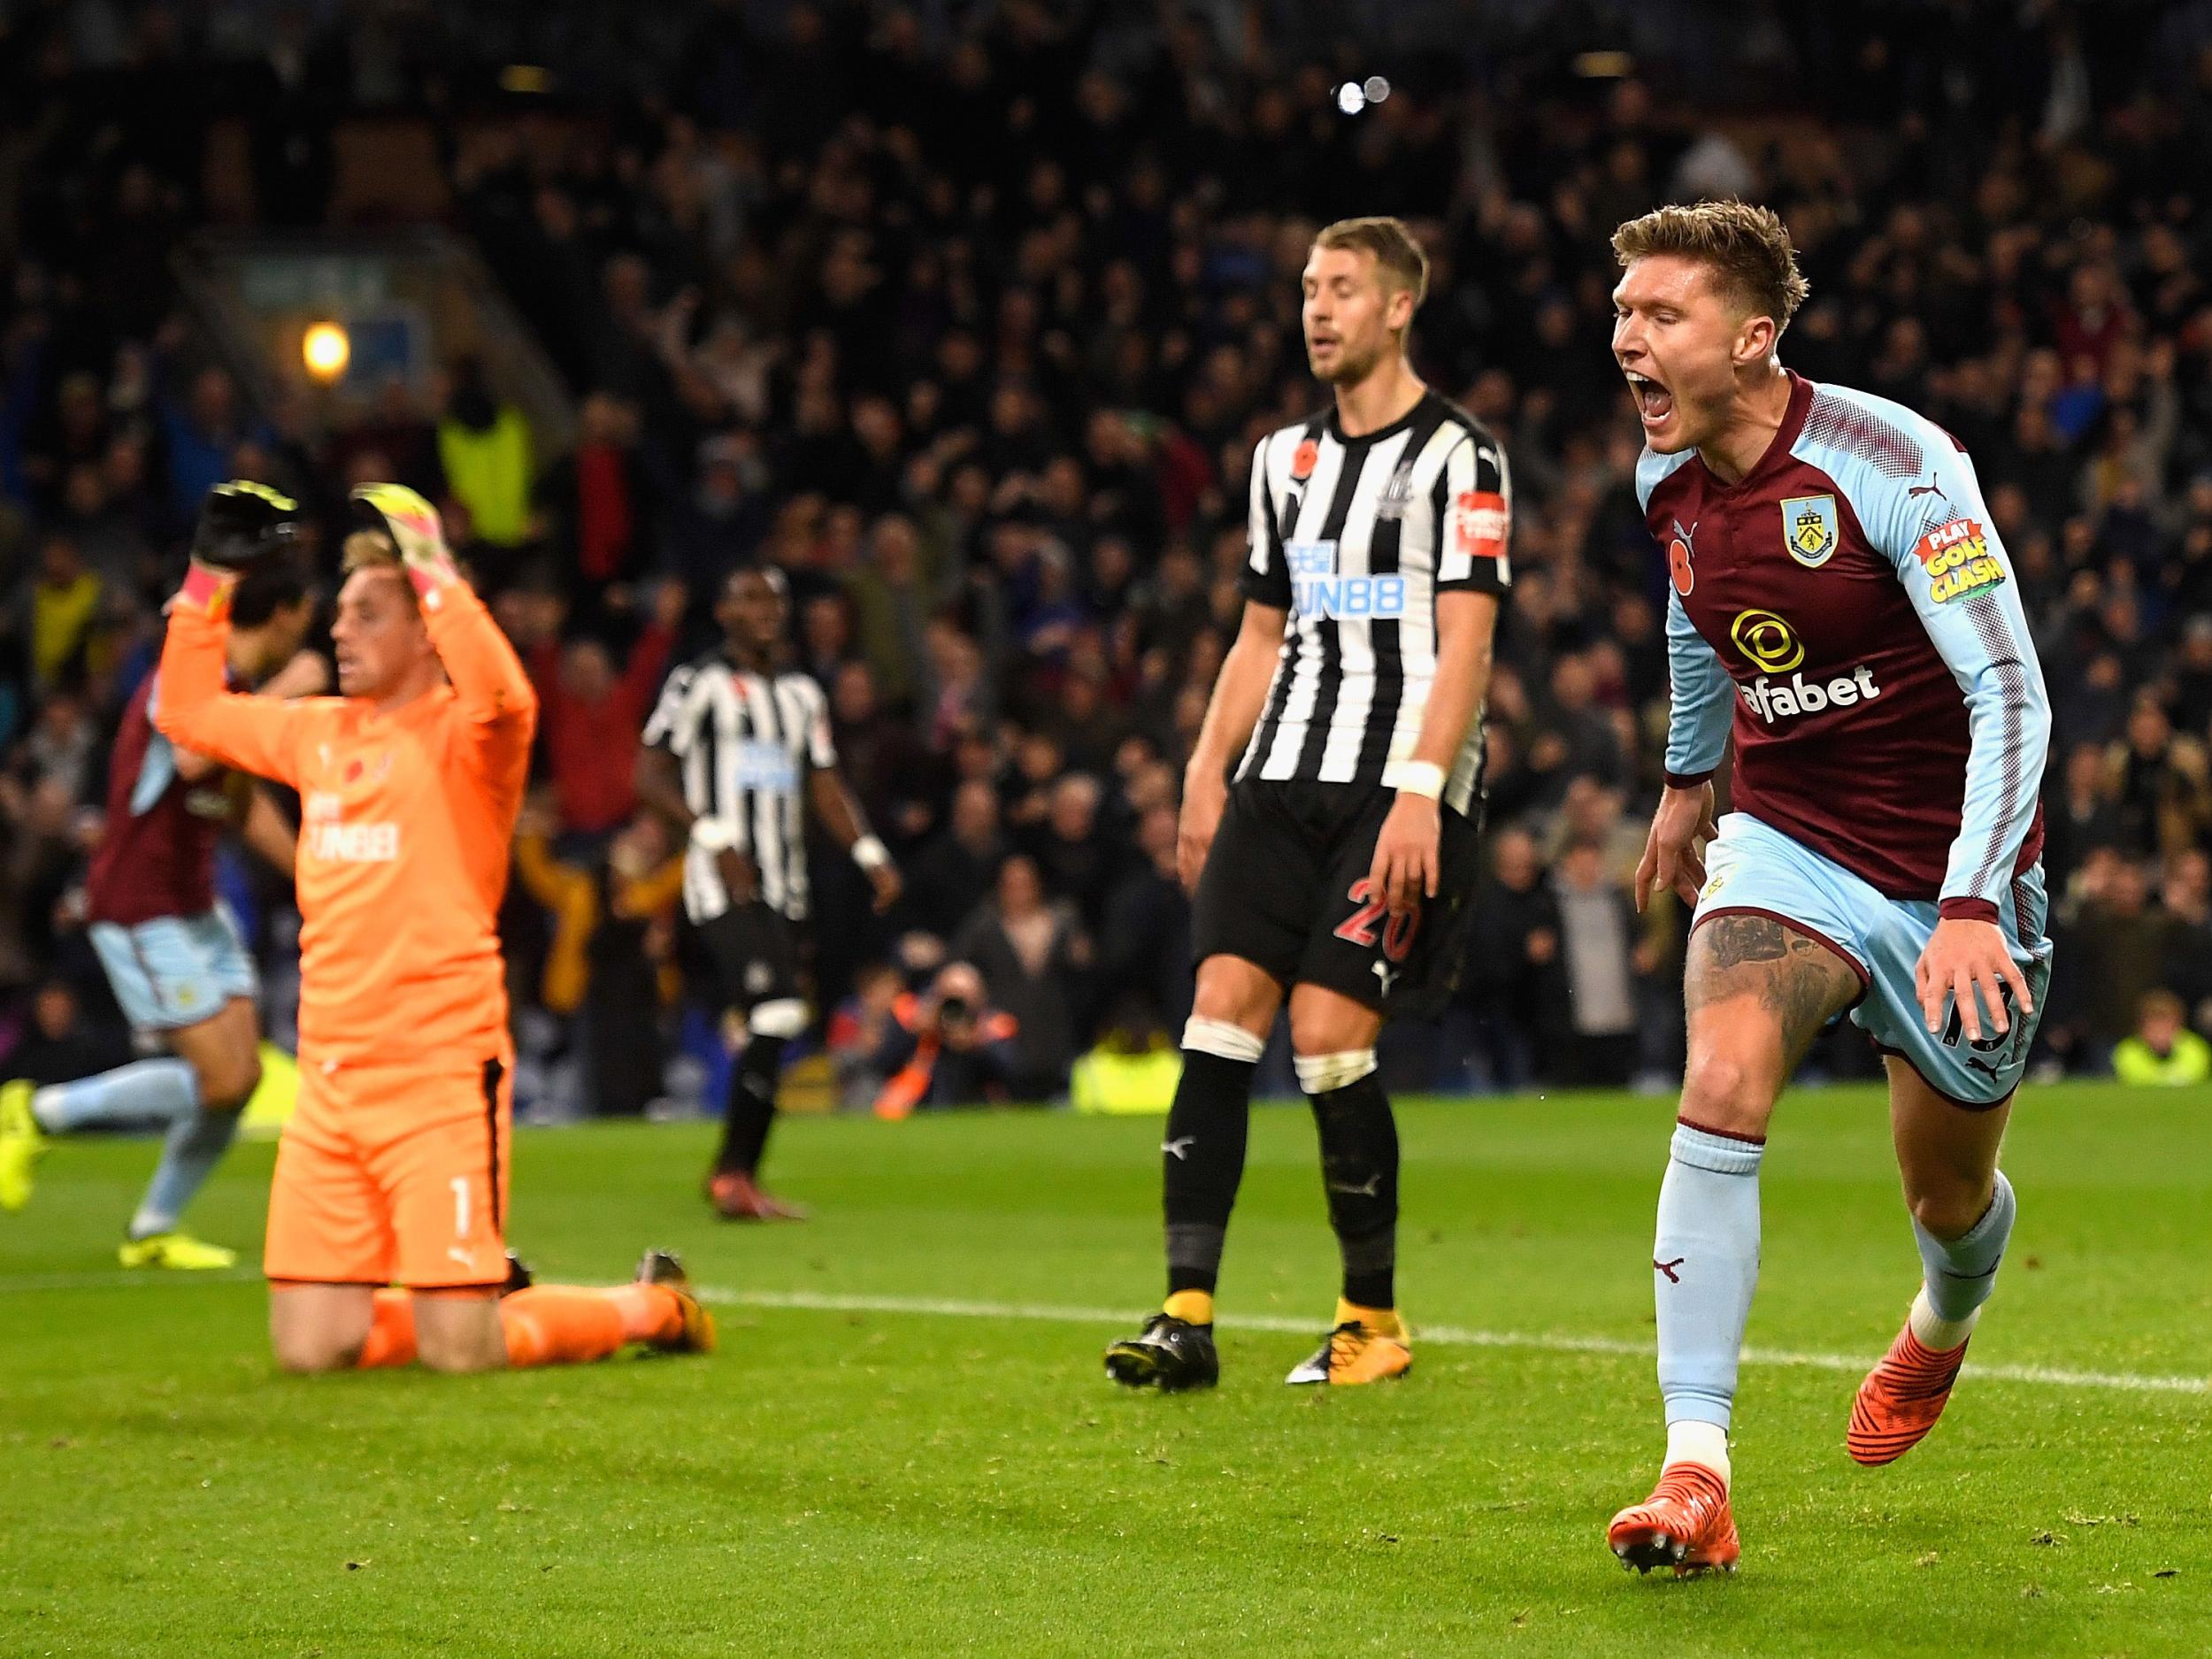 Jeff Hendrick's second-half goal proved to be the difference at Turf Moor